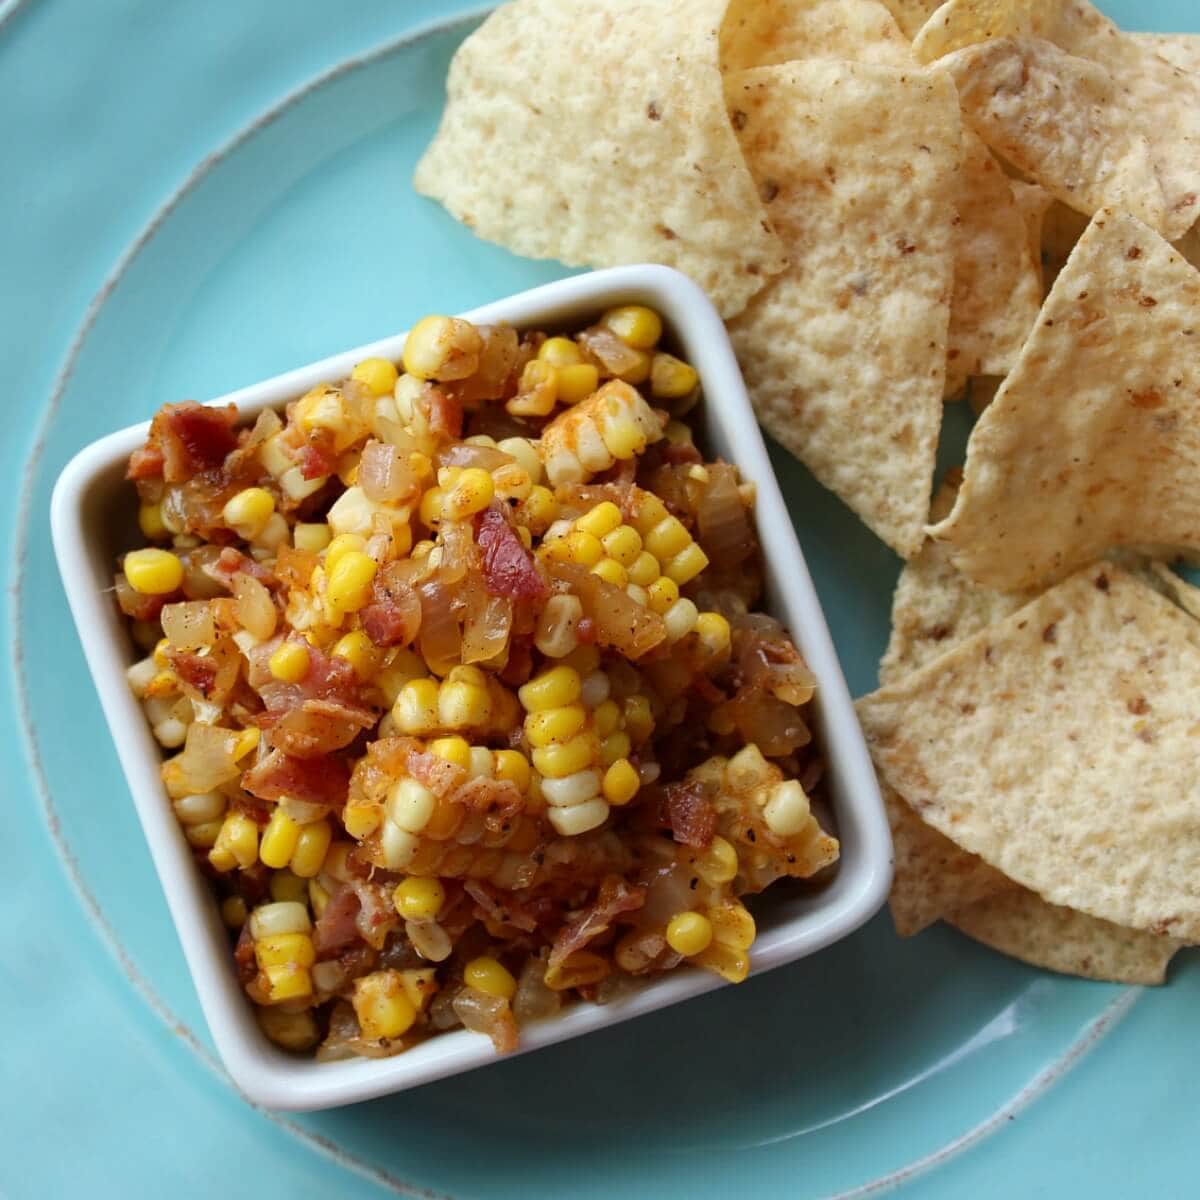 Image of Corn, Vidalia Onion and Bacon Salsa in a square dish with tortilla chips.